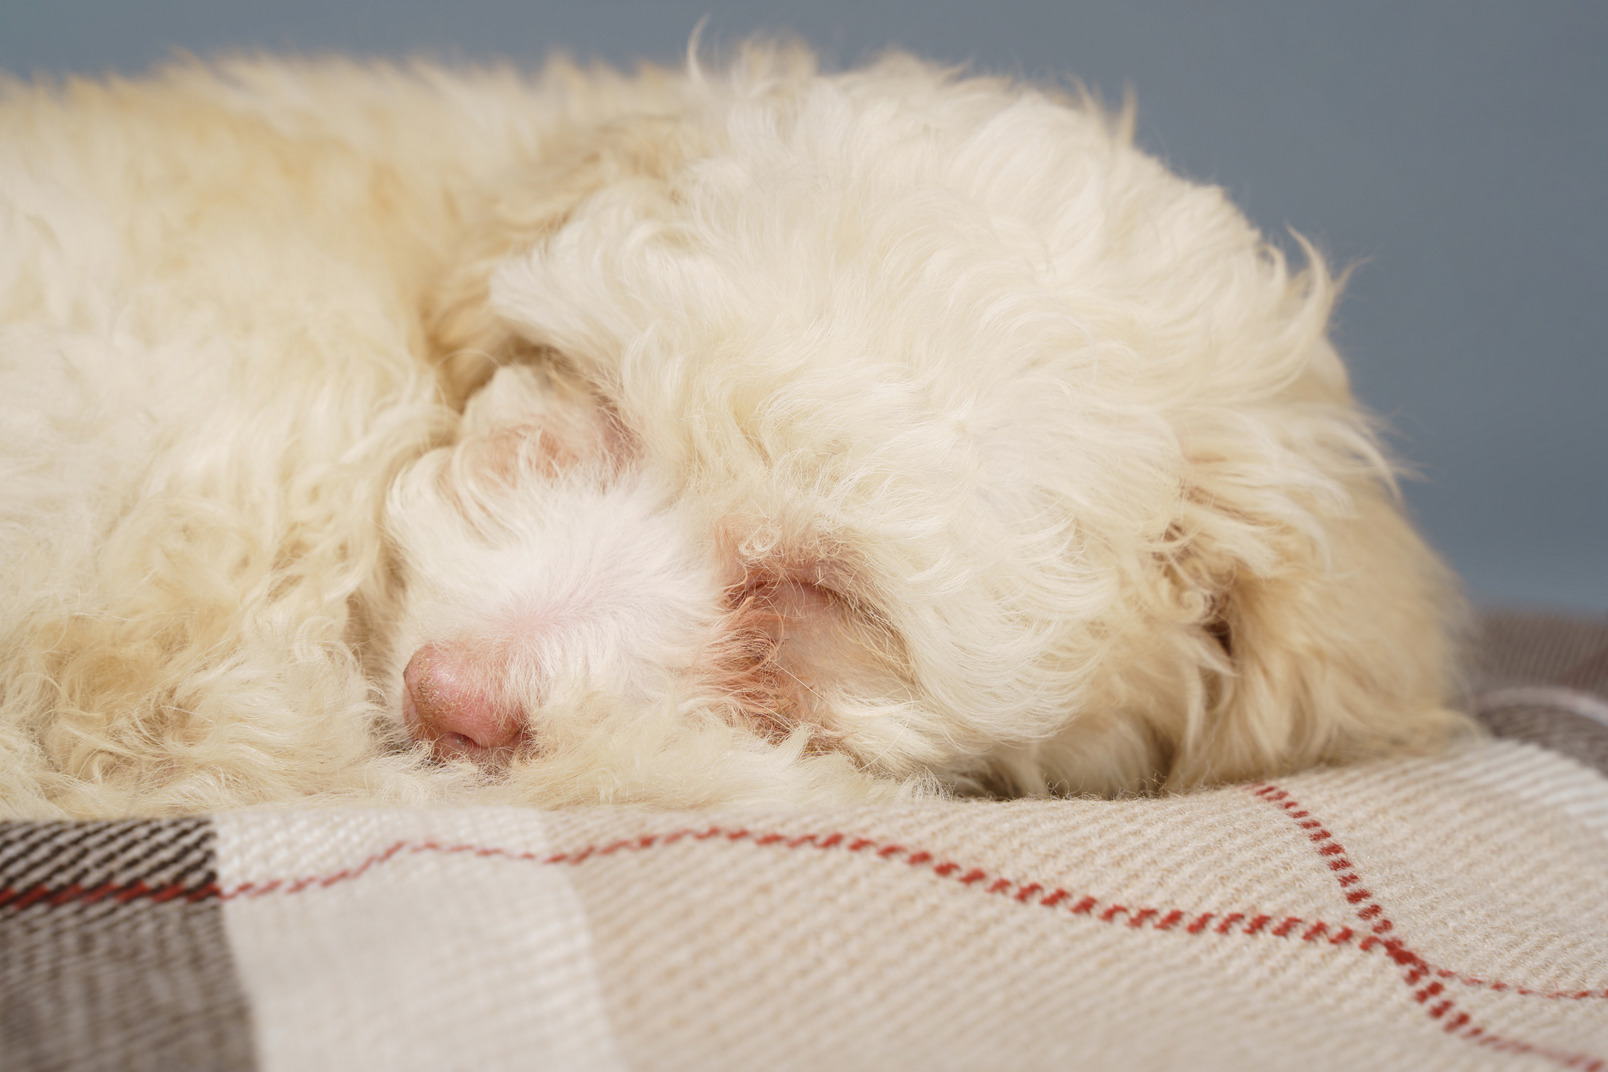 Close-up of a tiny puppy sleeping on a checked blanket